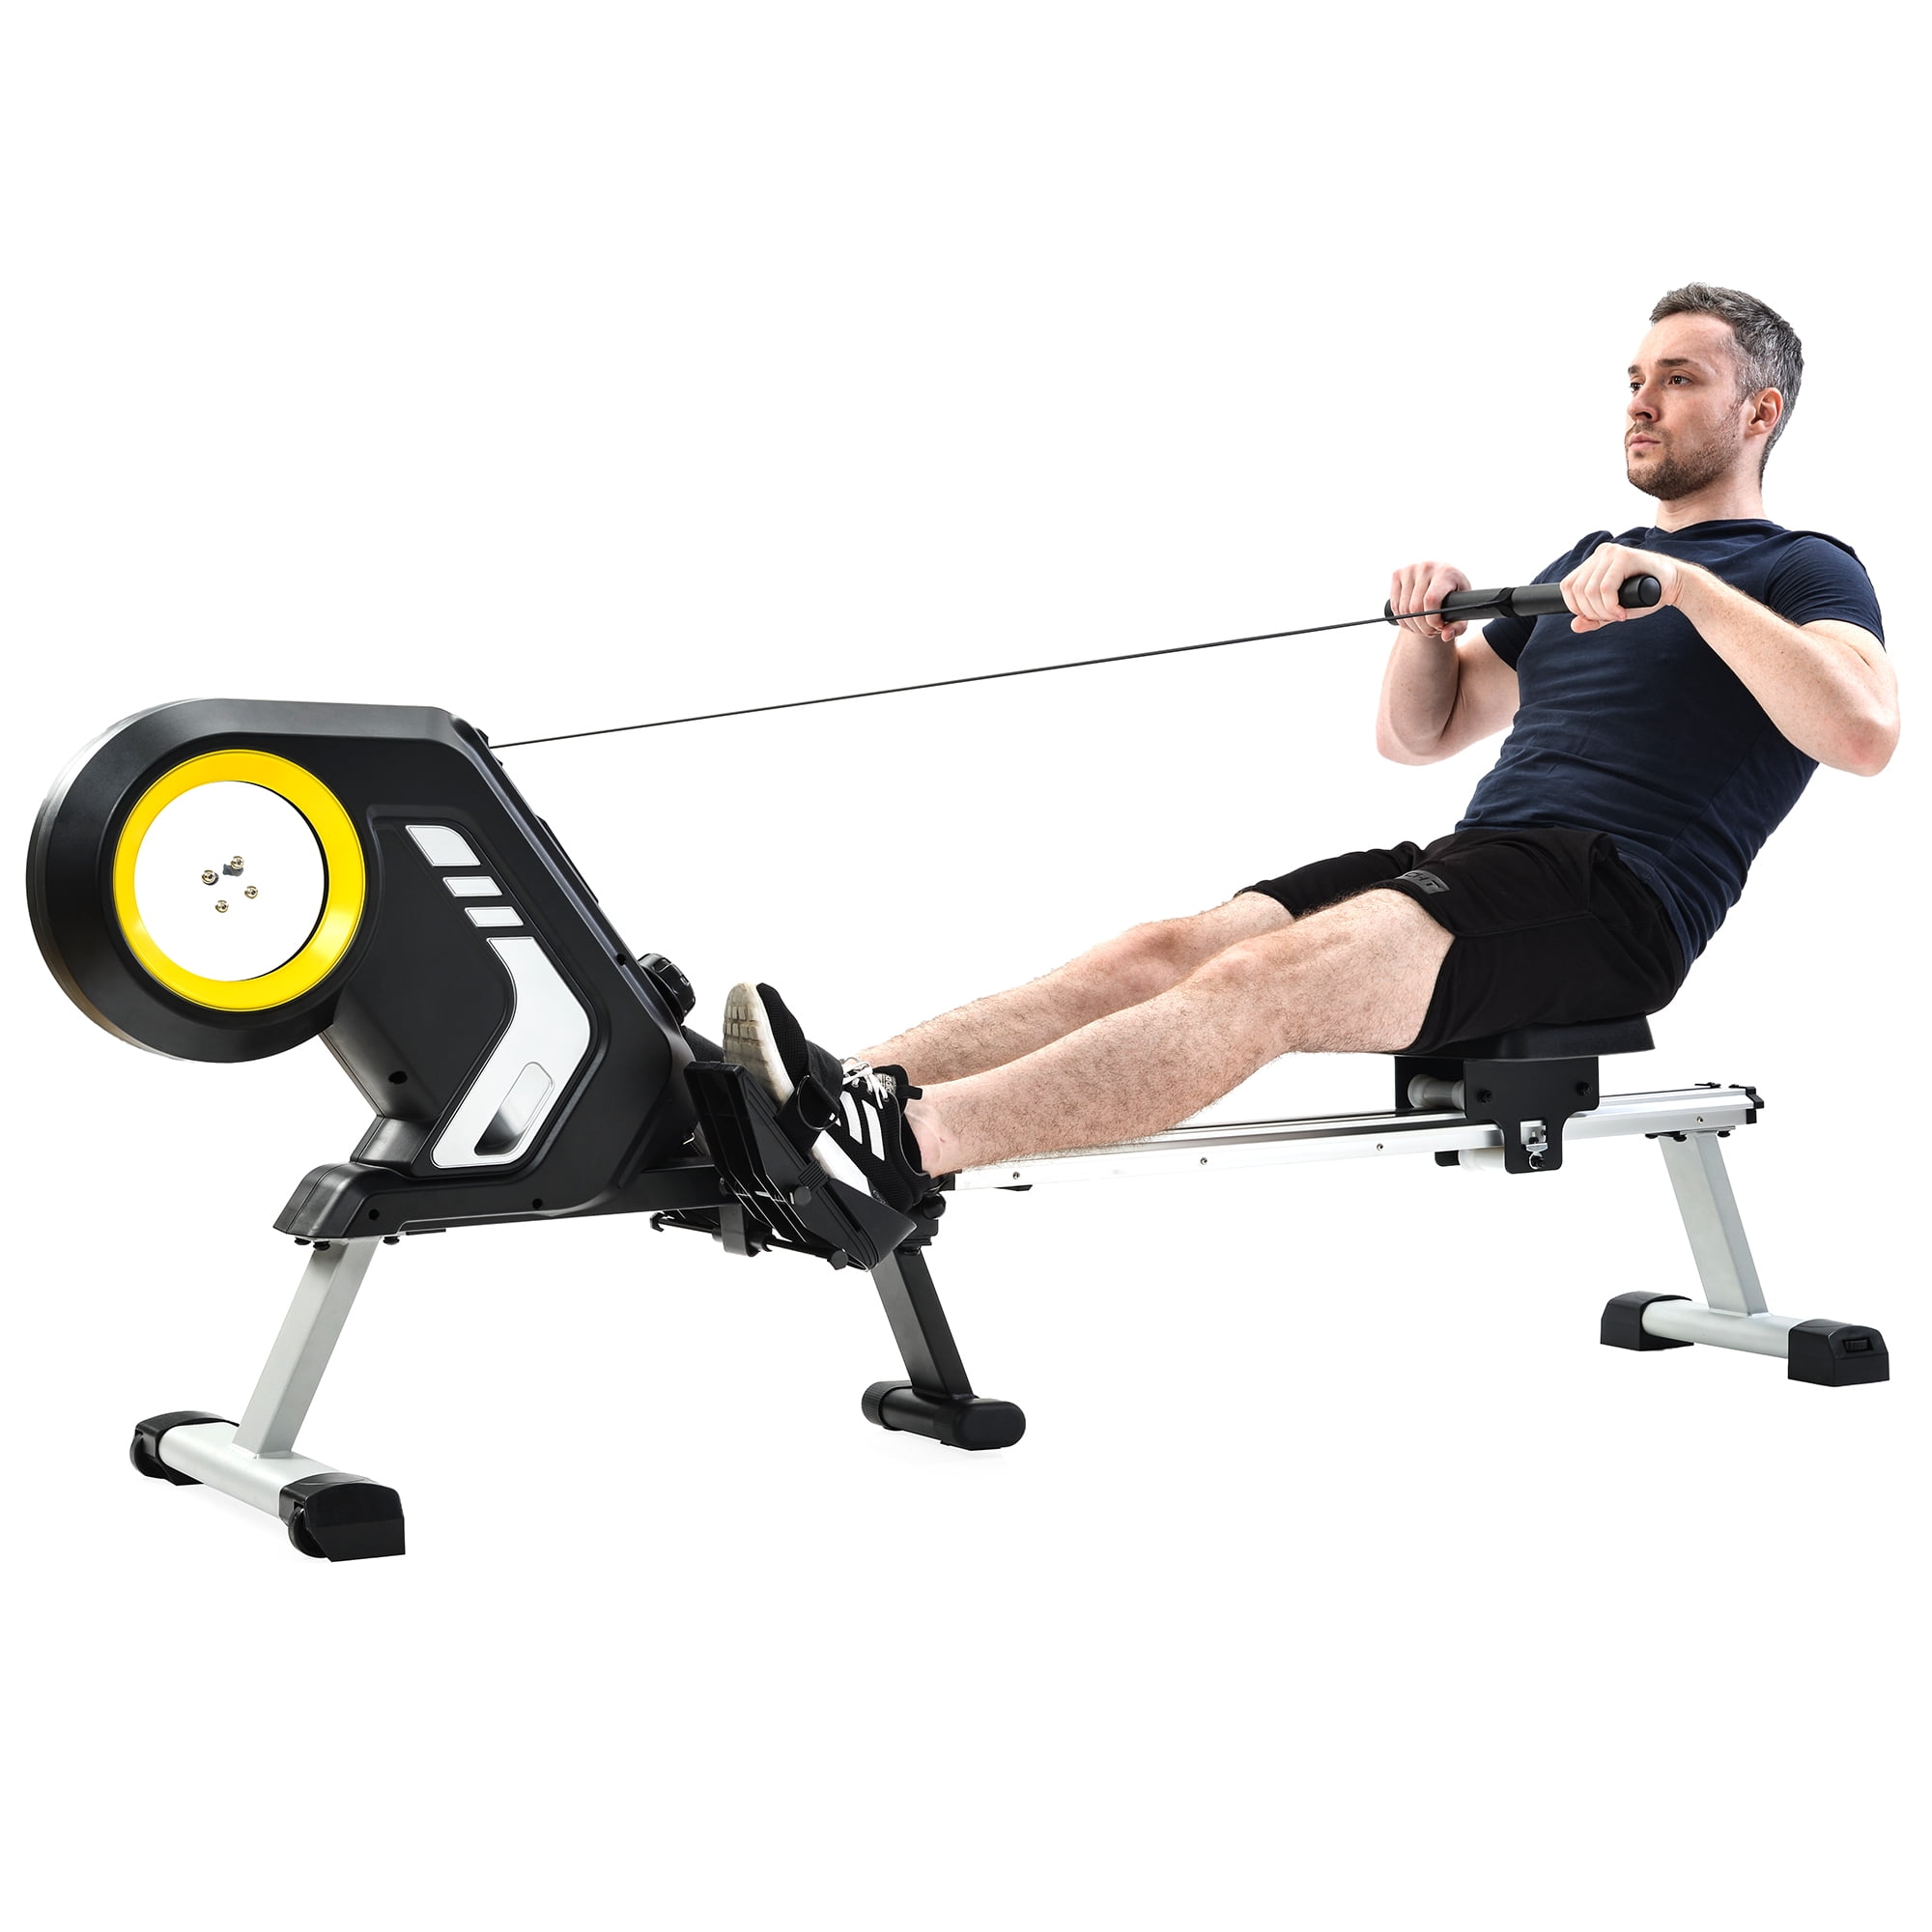 Details about   Hydraulic Rowing Machine Full Motion Adjustable Rower with 12 Level Resistance 